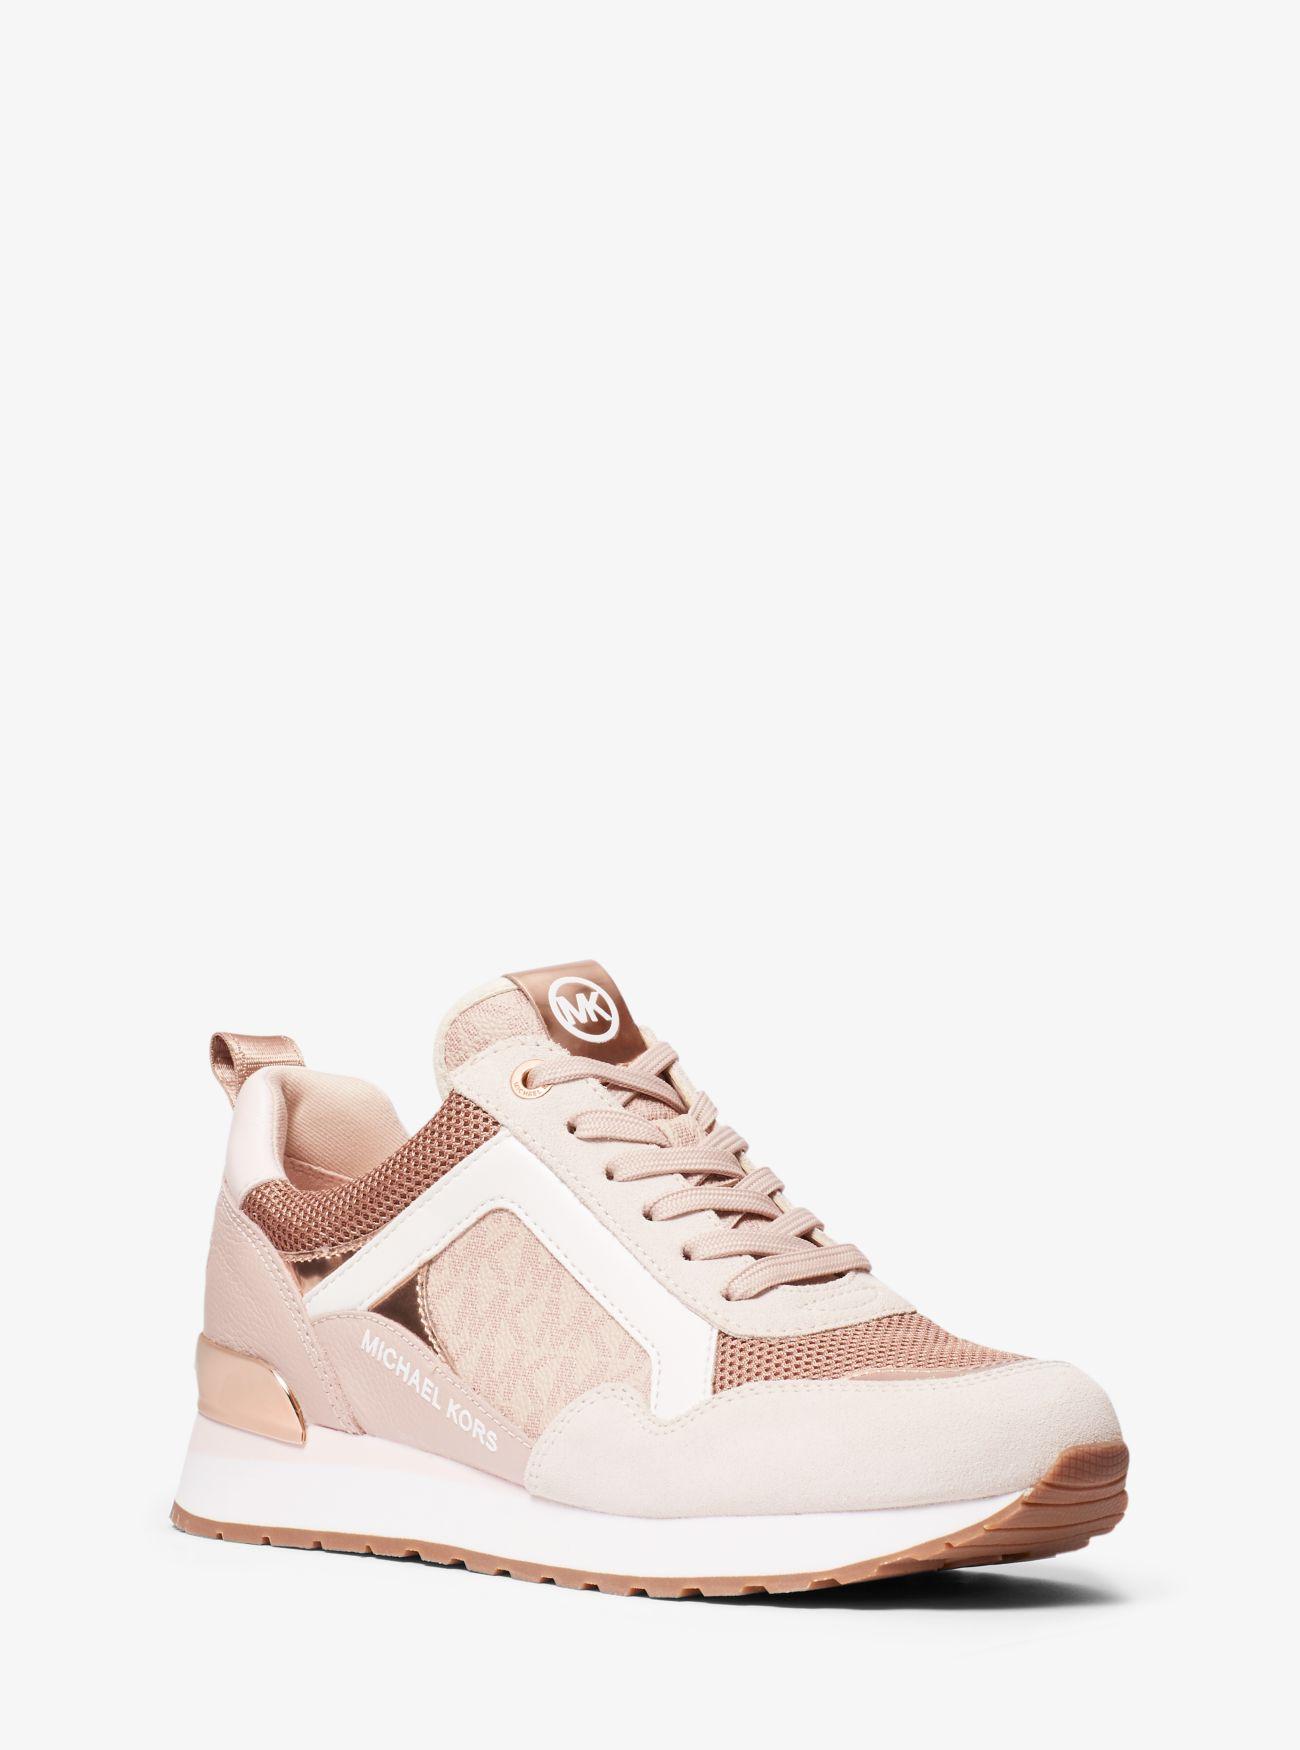 Michael Kors Wilma Suede And Logo Trainer in Pink | Lyst